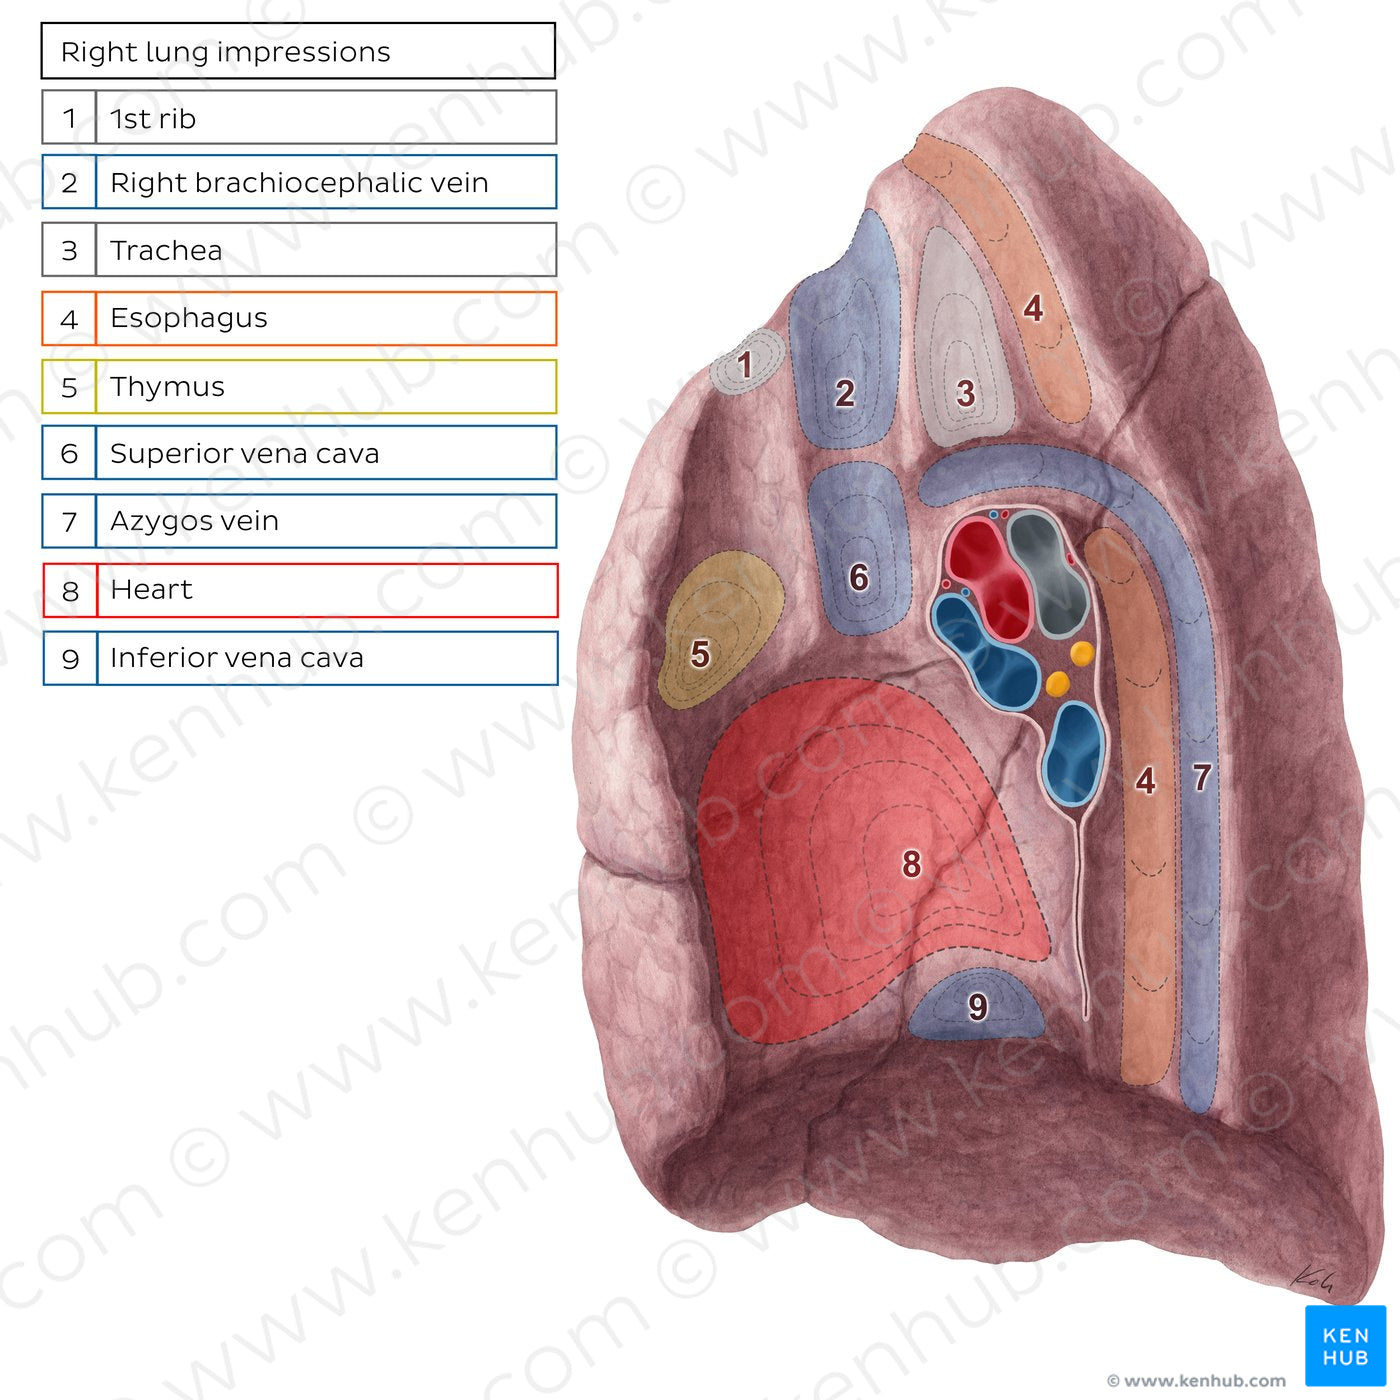 Impressions of right lung (English)